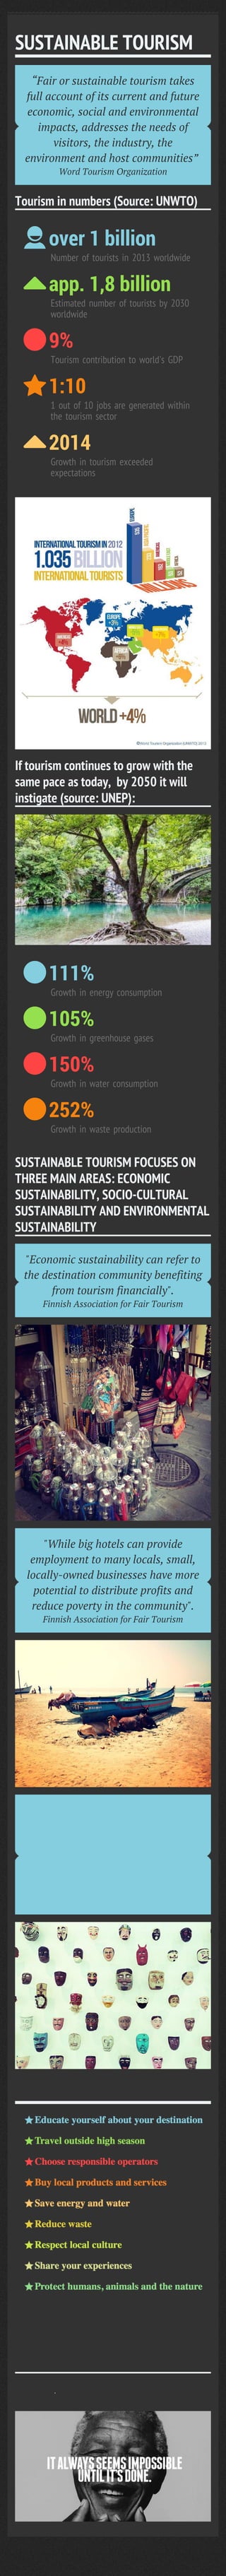 Create	infographics
travellerstree.net
SUSTAINABLE	TOURISM
“Fair	or	sustainable	tourism	takes
full	account	of	its	current	and	future
economic,	social	and	environmental
impacts,	addresses	the	needs	of
visitors,	the	industry,	the
environment	and	host	communities”	
Word	Tourism	Organization
Tourism	in	numbers	(Source:	UNWTO)
over 1 billion
Number of tourists in 2013 worldwide
app. 1,8 billion
Estimated number of tourists by 2030
worldwide
9%
Tourism contribution to world's GDP
1:10
1 out of 10 jobs are generated within
the tourism sector
2014
Growth in tourism exceeded
expectations
If	tourism	continues	to	grow	with	the
same	pace	as	today,		by	2050	it	will
instigate	(source:	UNEP):
111%
Growth in energy consumption
105%
Growth in greenhouse gases
150%
Growth in water consumption
252%
Growth in waste production
SUSTAINABLE	TOURISM	FOCUSES	ON
THREE	MAIN	AREAS:	ECONOMIC
SUSTAINABILITY,	SOCIO-CULTURAL
SUSTAINABILITY	AND	ENVIRONMENTAL
SUSTAINABILITY
"Economic	sustainability	can	refer	to
the	destination	community	benefiting
from	tourism	financially".
Finnish	Association	for	Fair	Tourism
"While	big	hotels	can	provide
employment	to	many	locals,	small,
locally-owned	businesses	have	more
potential	to	distribute	profits	and
reduce	poverty	in	the	community".
Finnish	Association	for	Fair	Tourism
"Sustainable	tourism	aims	to	protect
the	local	culture	against	cultural
commercialization:	a	process	where
local	heritage	and	culture	are
modified	to	meet	the	tourists’
expectations".
Finnish	Association	for	Fair	Tourism
WHAT	CAN	YOU	DO?
Turtle	tourism	in	the	Dominican
Republic	builds	green	economies	and
preserves	marine	biodiversity	(video	by
UNEP)
//youtu.be/8OXqdHSOIxI
 